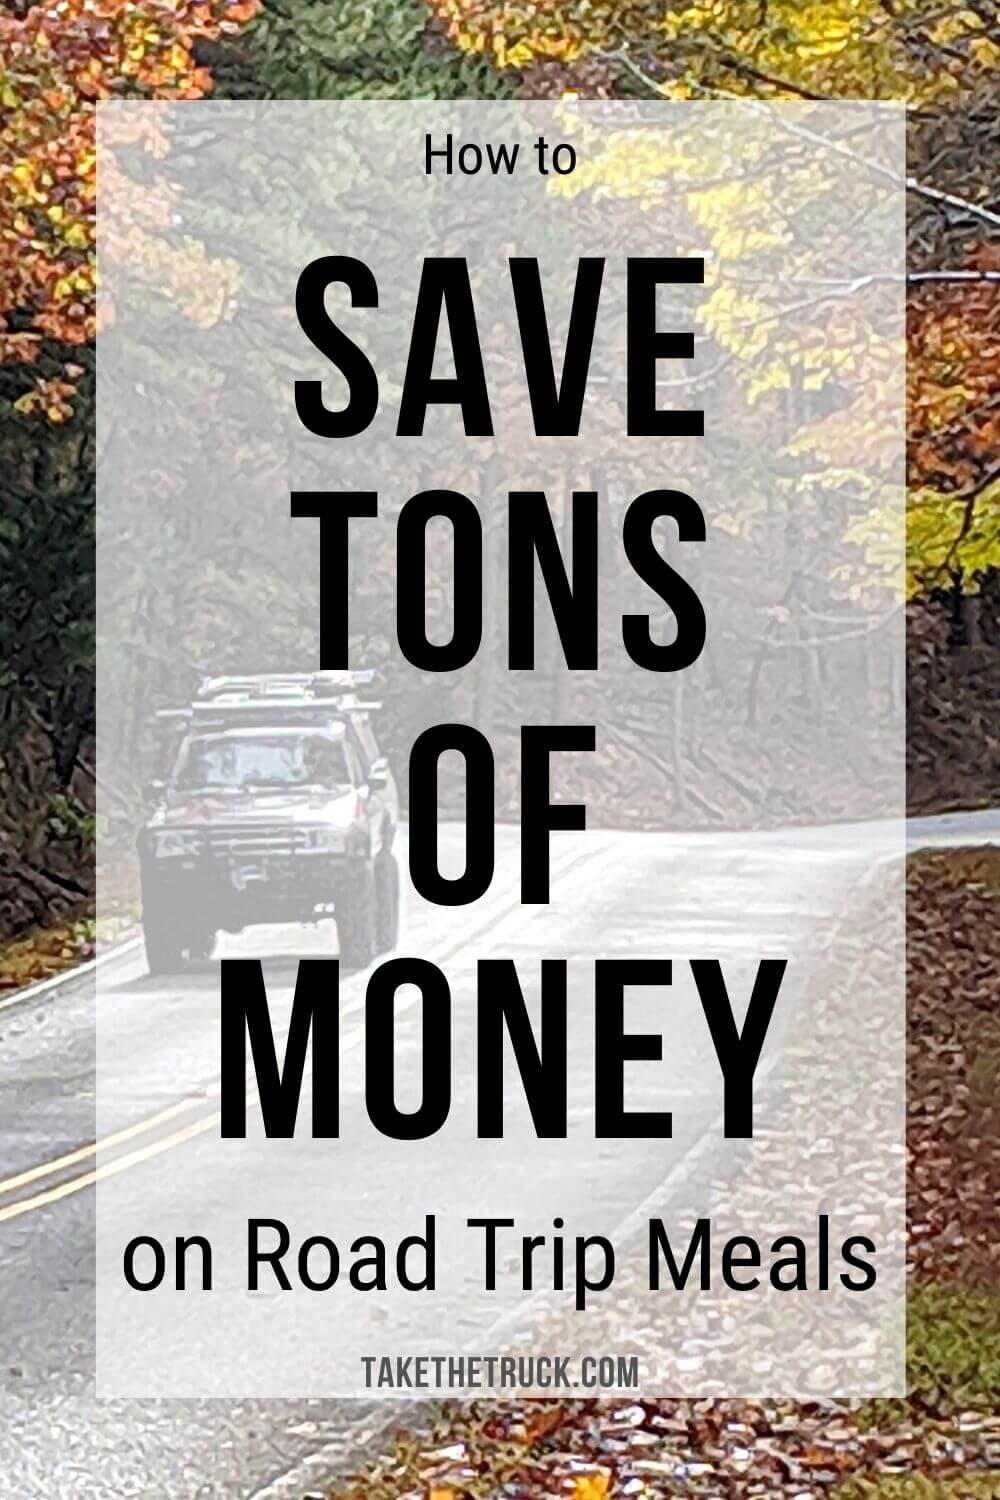 Learn how to save money on food on a road trip with these eight simple road trip food and meal tips. Budget road trip meals and food can be healthy, good, and help you save money.